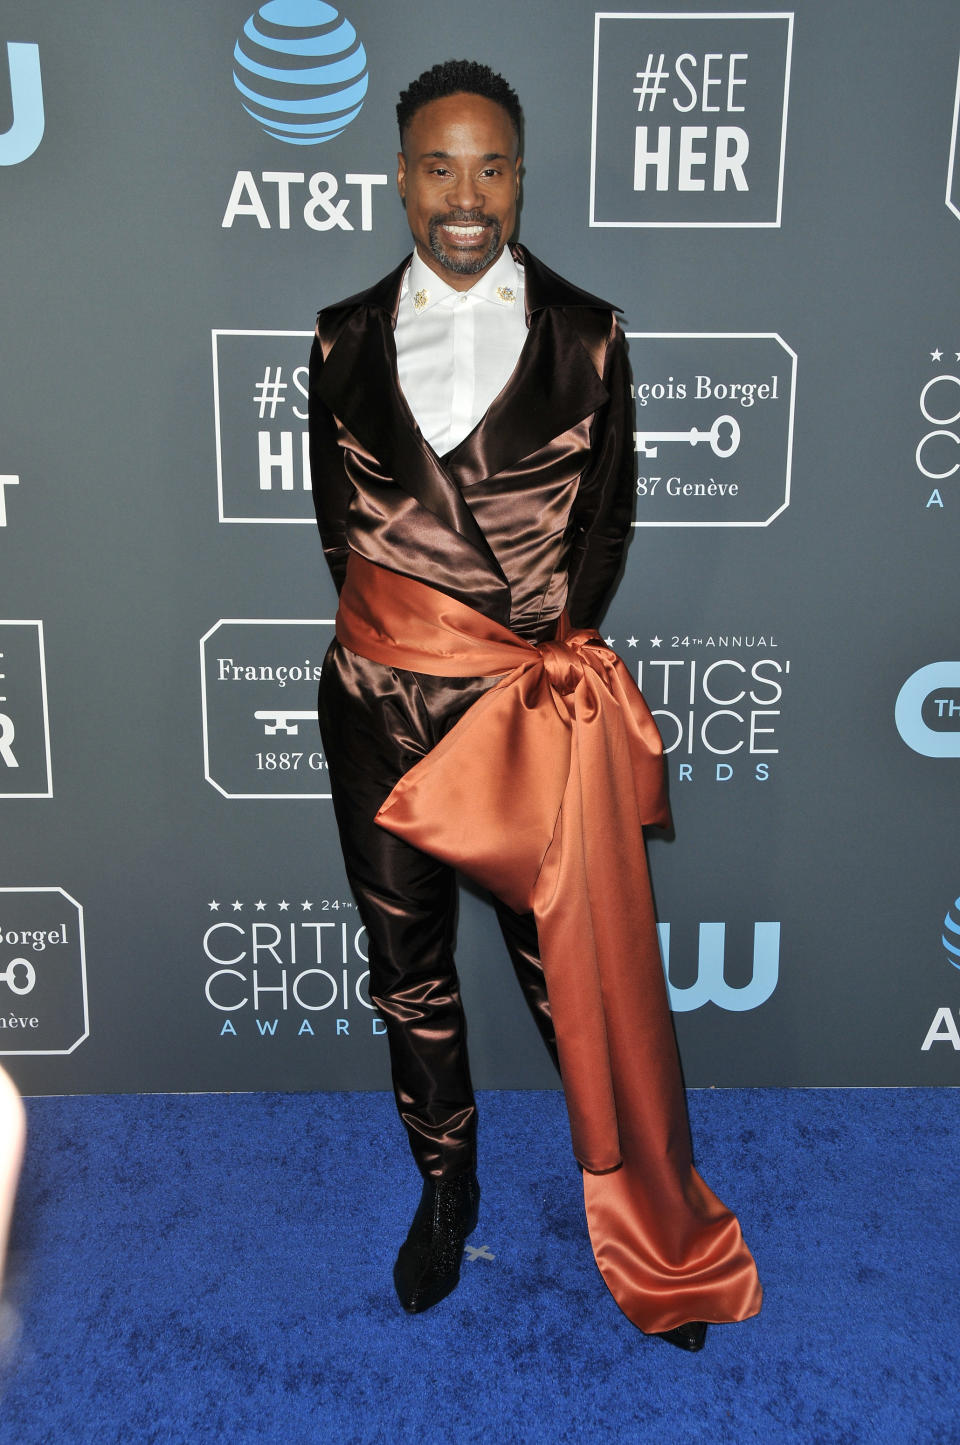 Billy Porter at the 24th Annual Critics Choice Awards in LA in January 2019